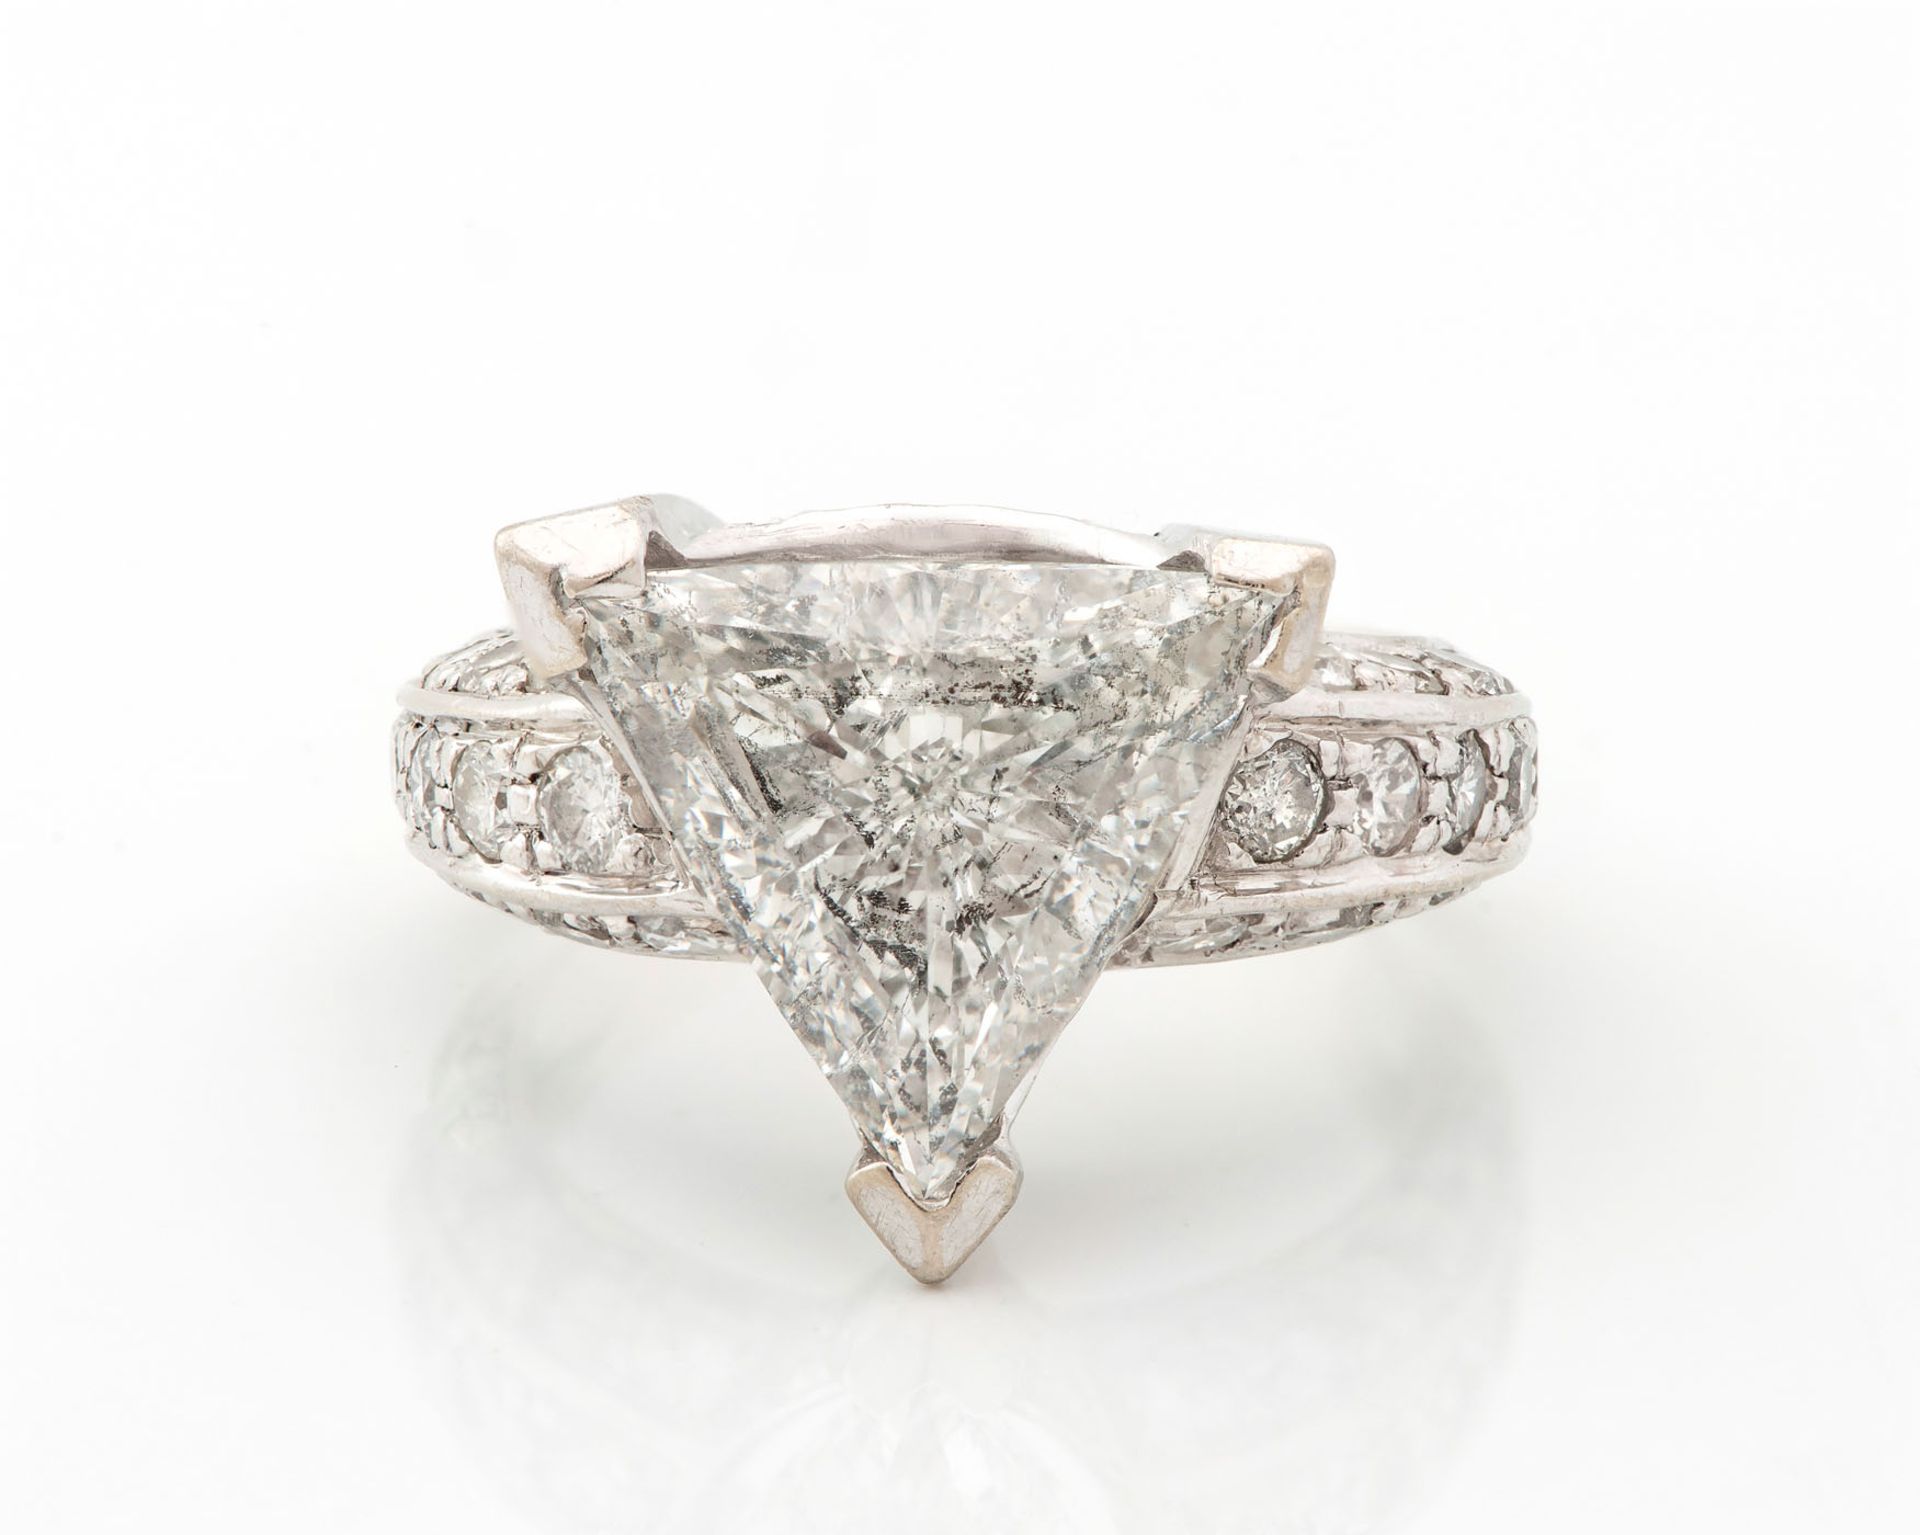 A 5.03Ct Trillion Cut Diamond and 14K White Gold Engagement Ring - Image 3 of 4